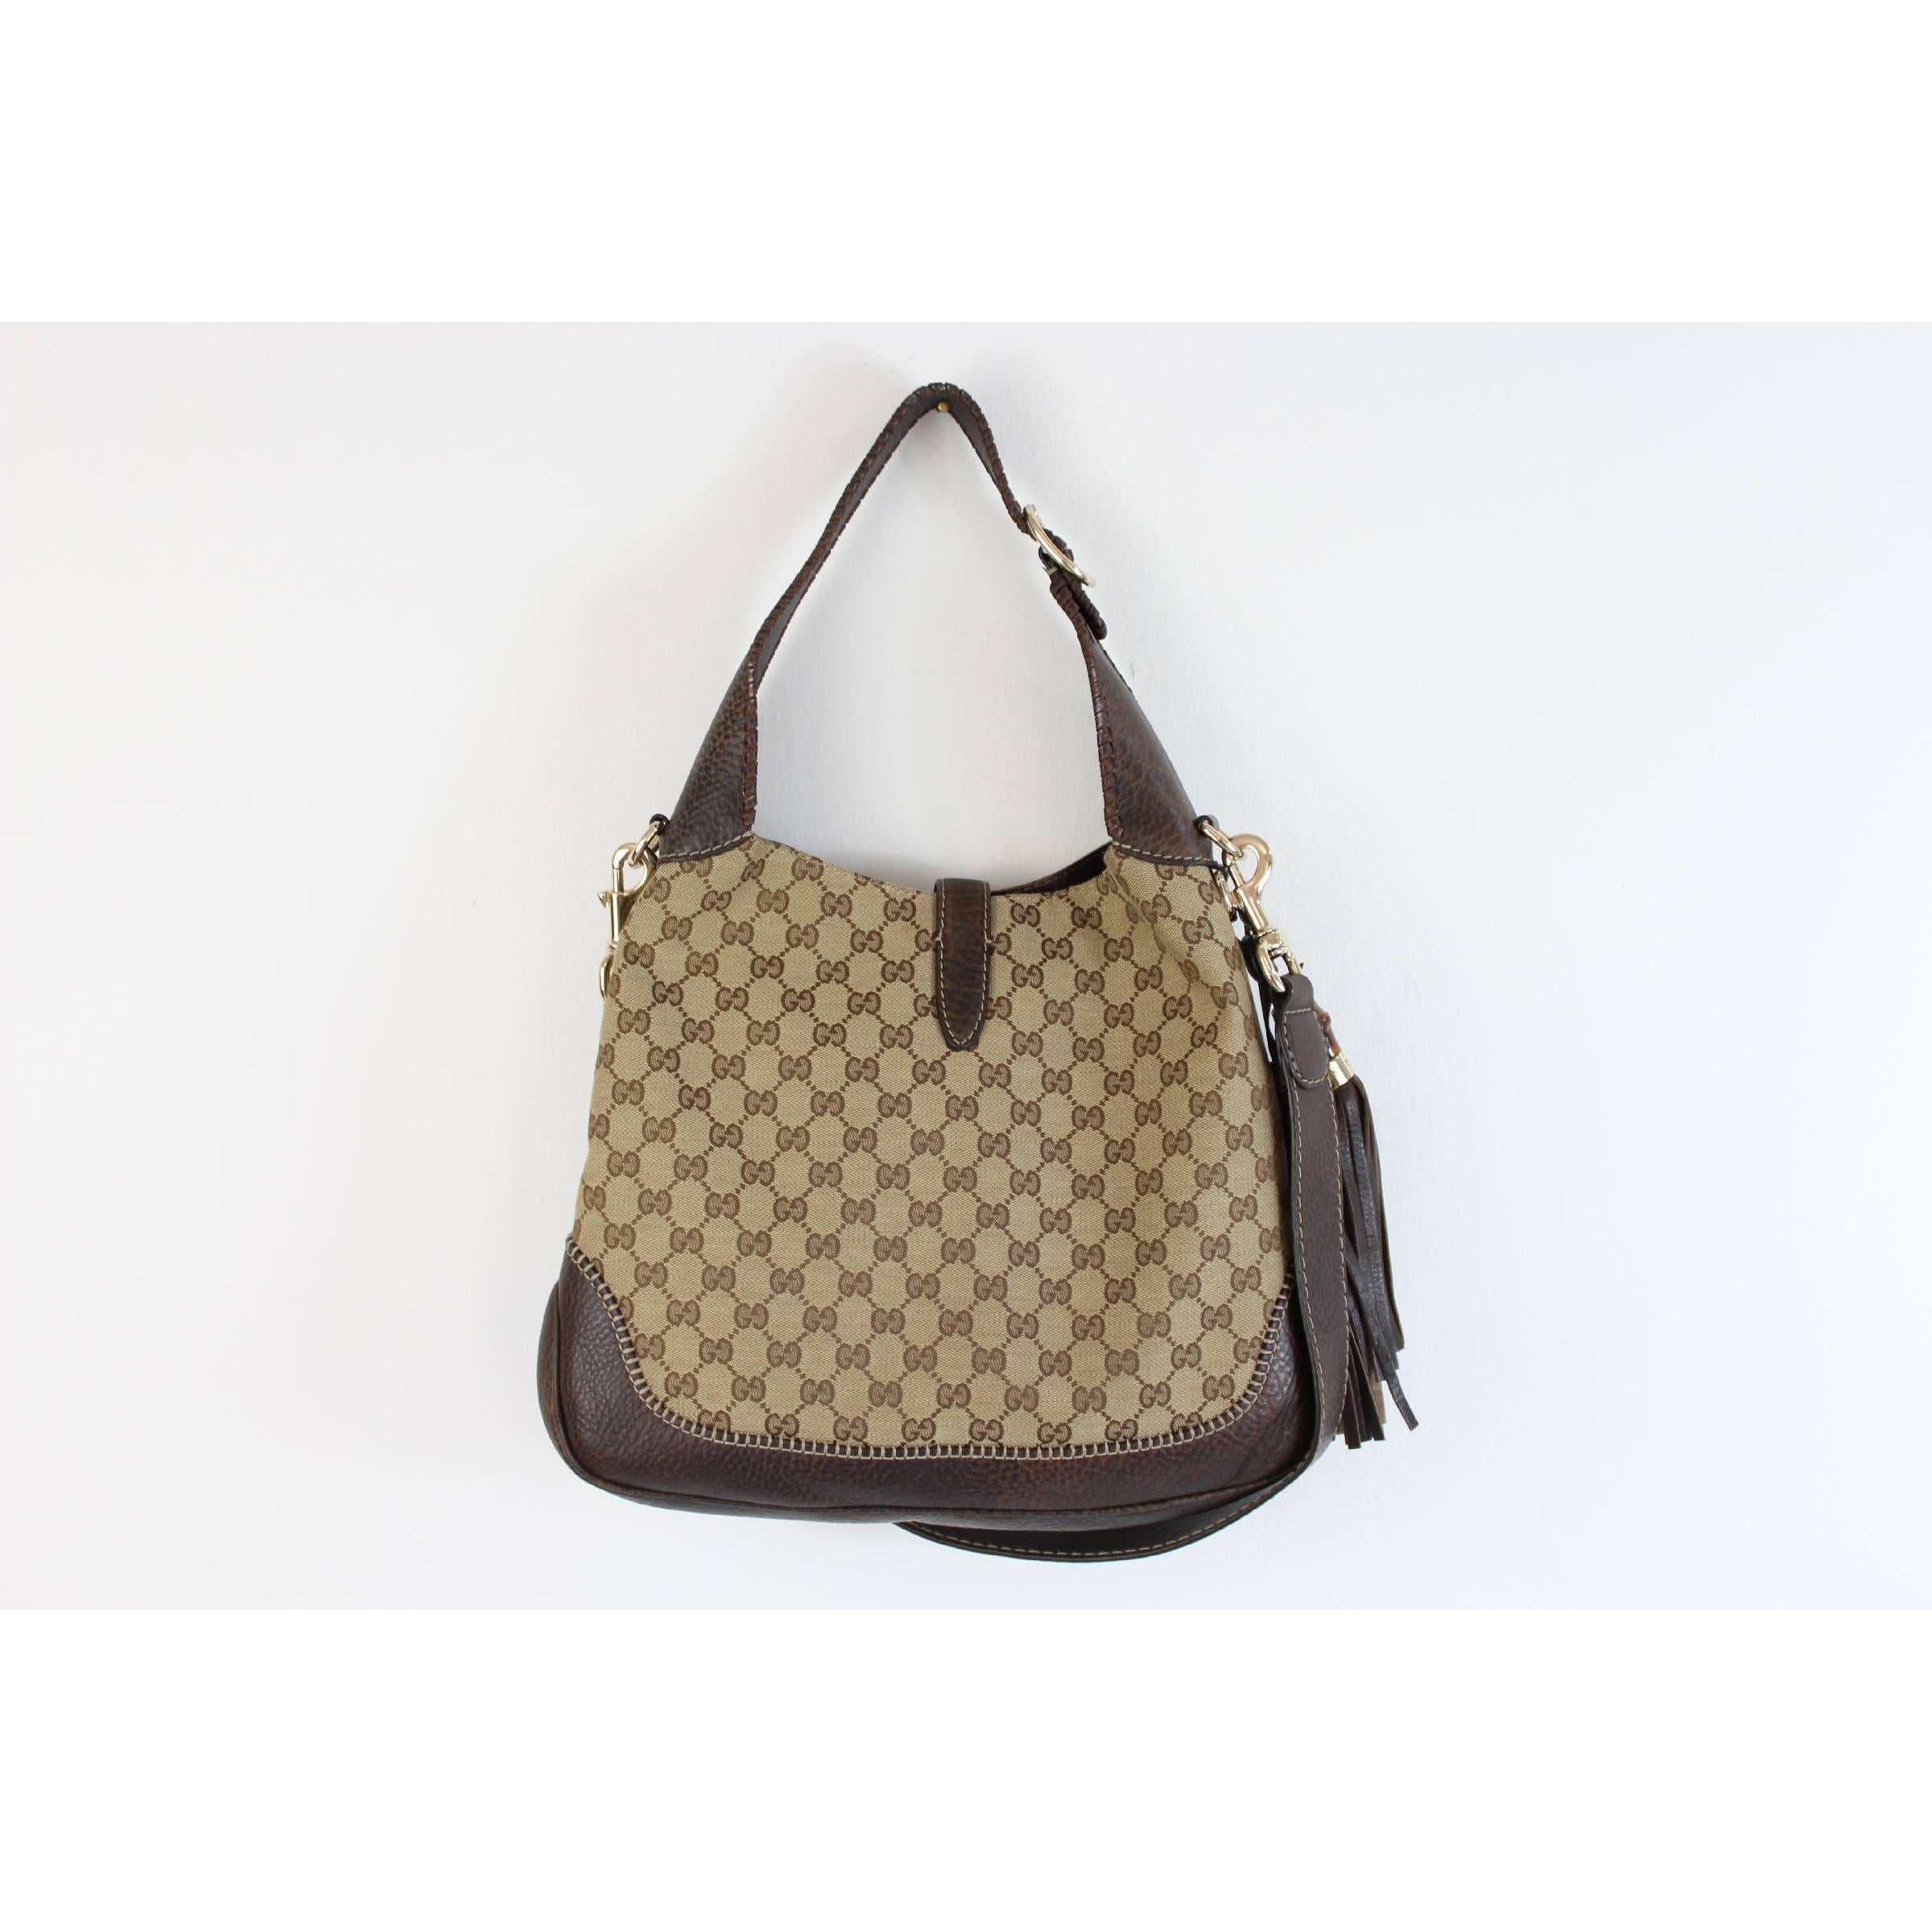 Gucci vintage bag, Jackie model, leather and canvas, beige and brown color. Monogram fabric, shoulder strap in brown leather with adjustable strap, second longer shoulder strap. Internally and lined with a zippered pocket. Clasp with bamboo outside.